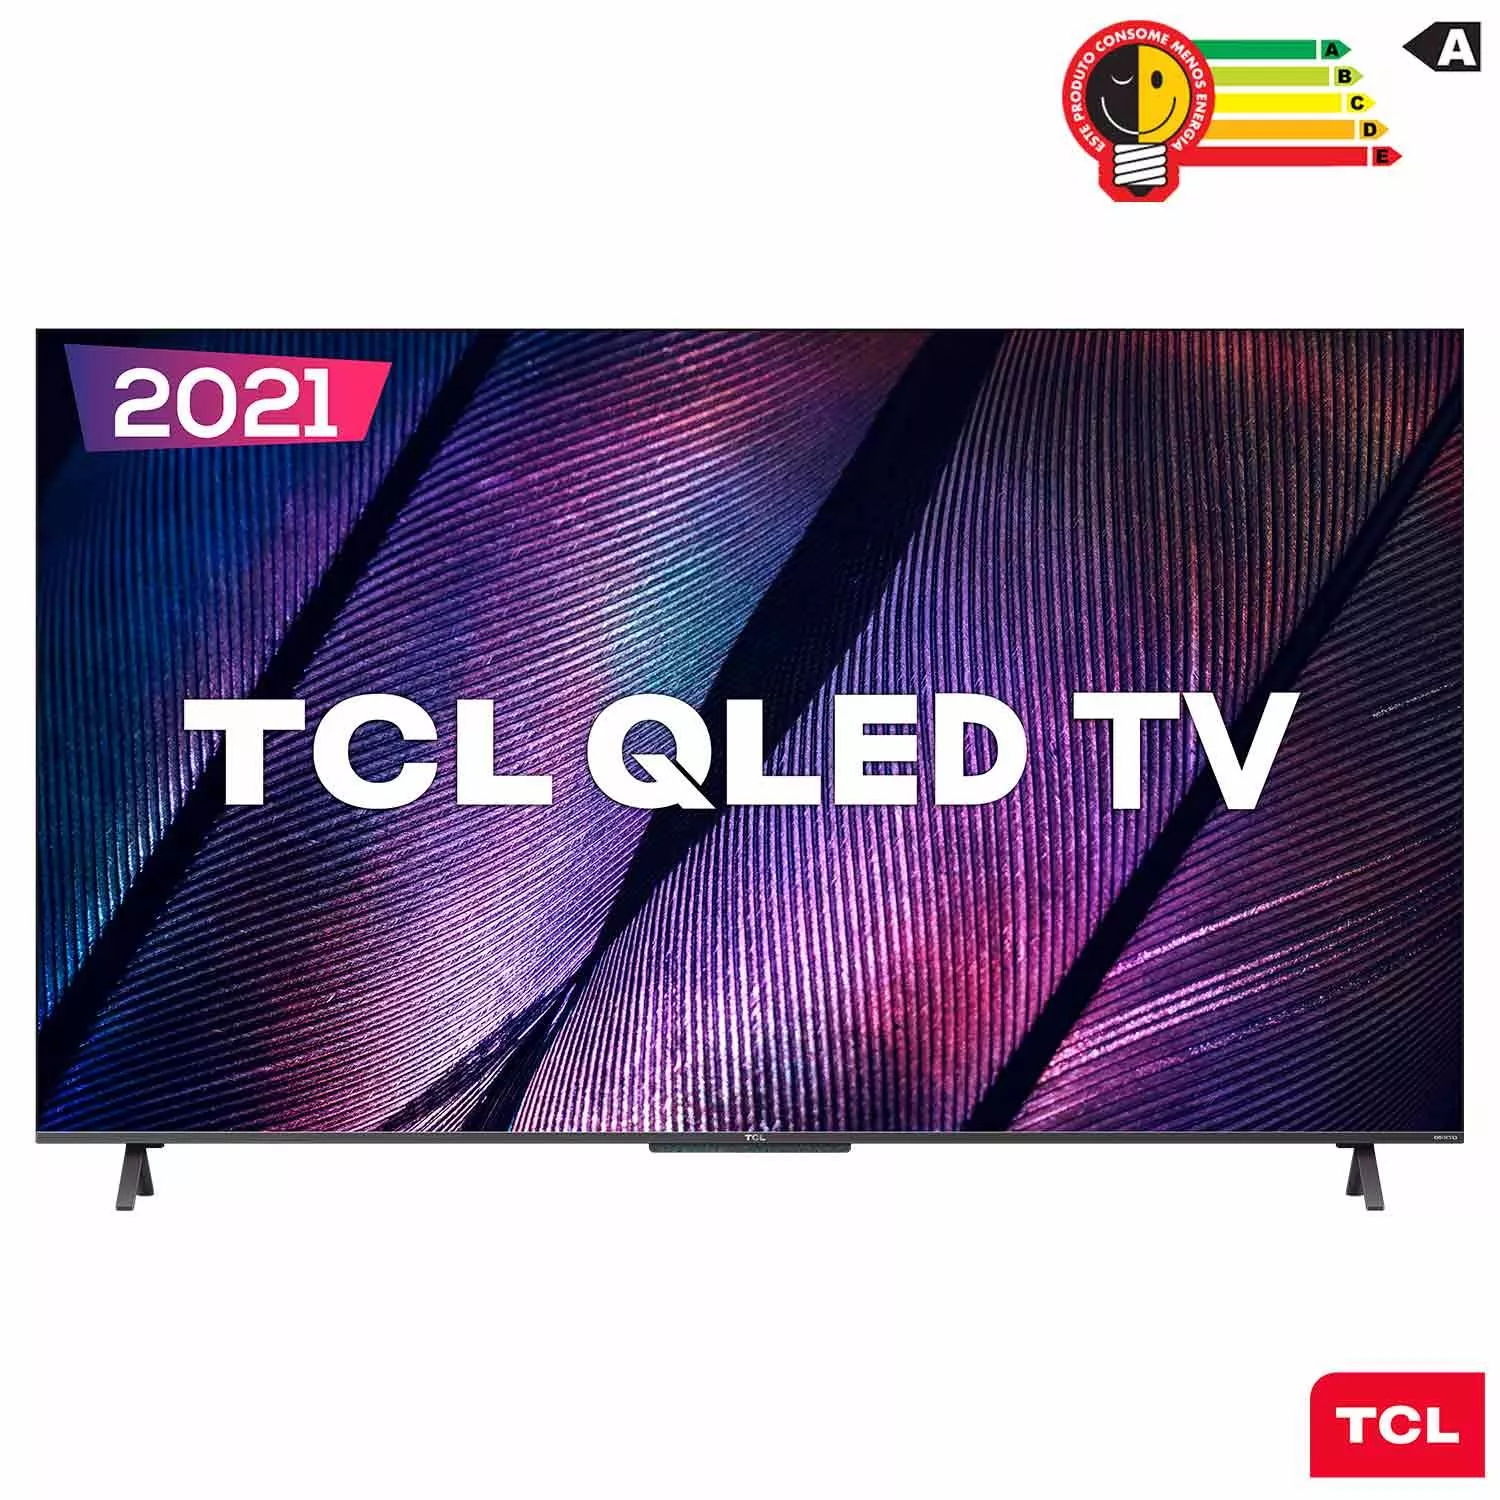 Smart Tv Tcl Qled Ultra Hd 4k 55? Android Tv Com Google Assistant, Dolby Vision, Hdr10+ E Wi-fi - 55c725